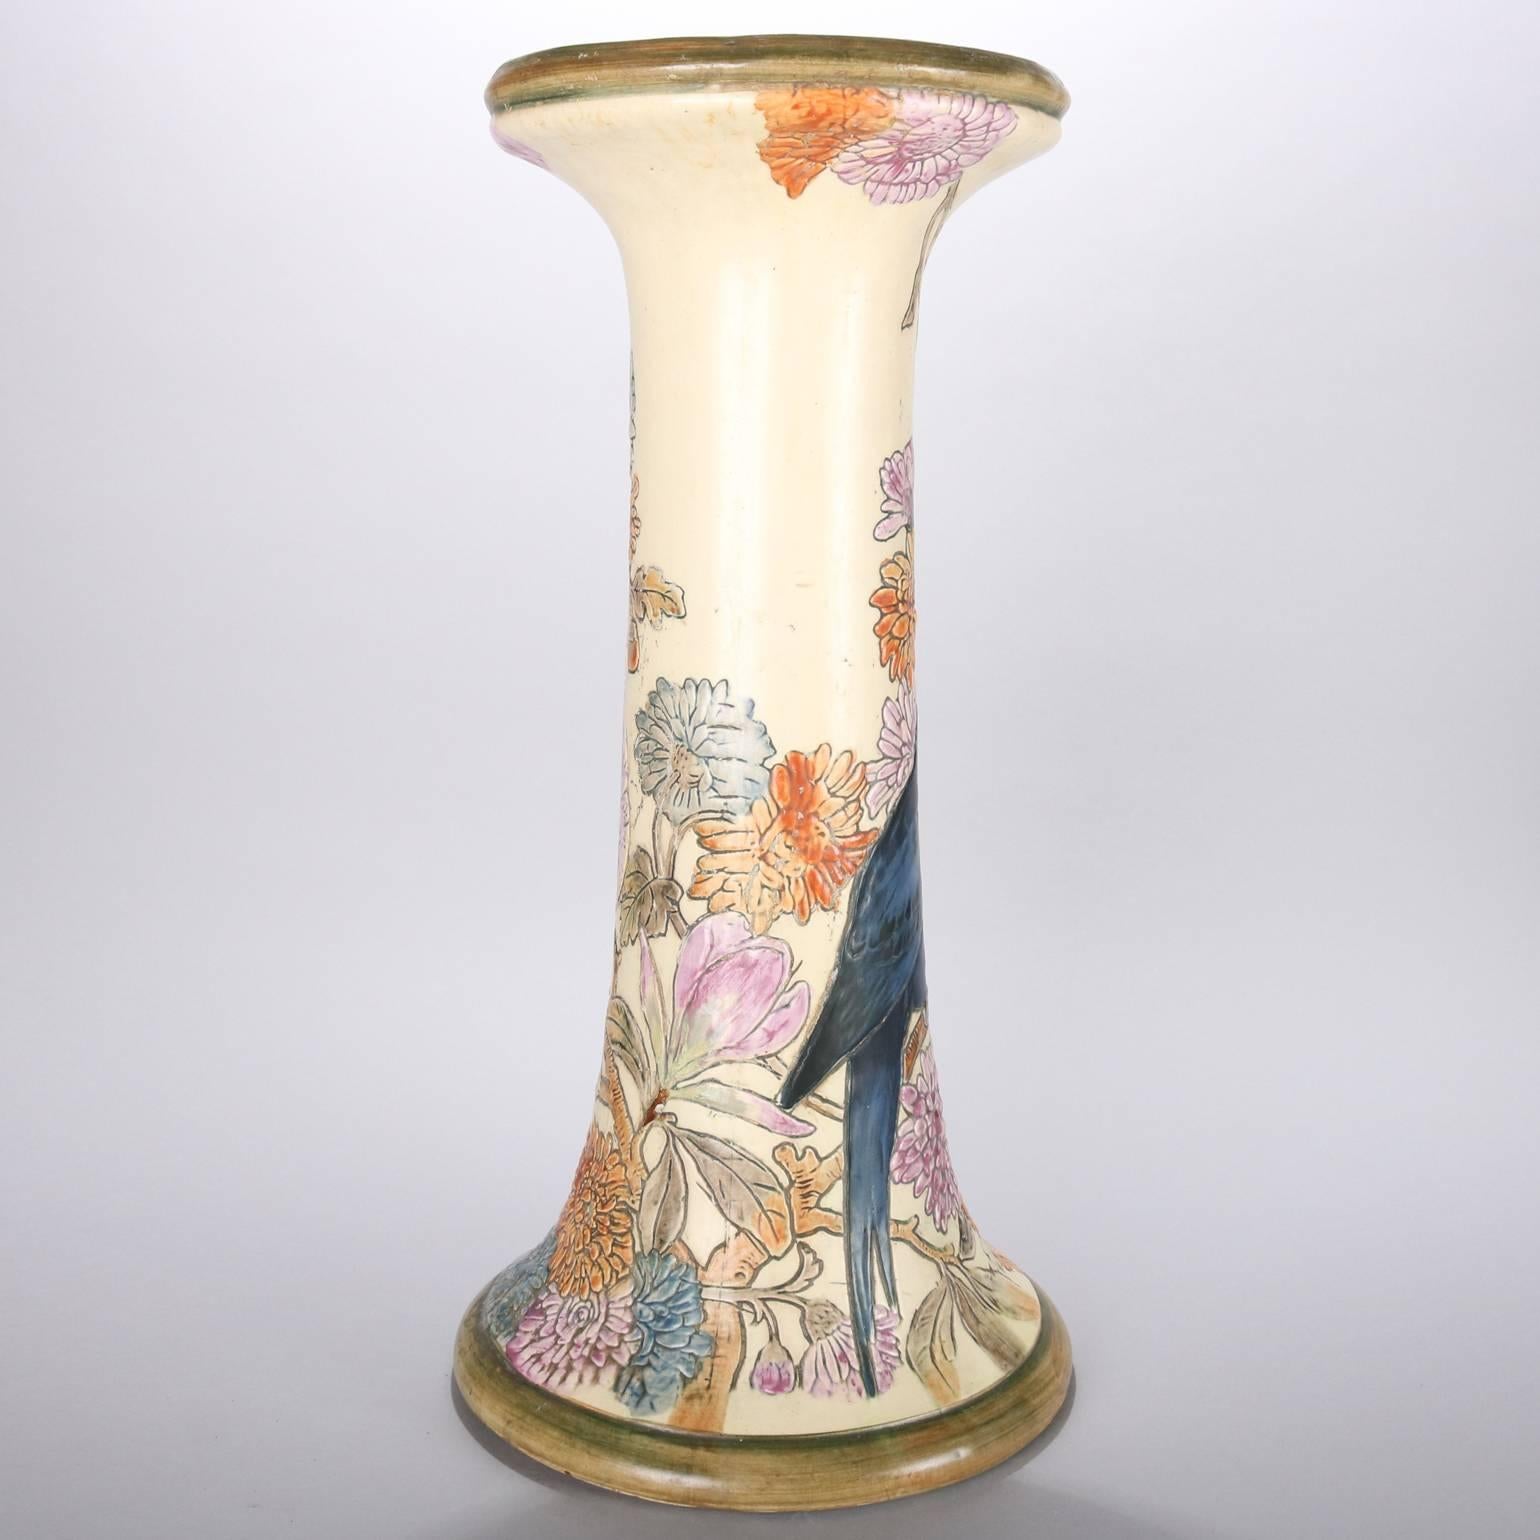 Antique Art Nouveau Weller School art pottery Flemish pedestal features hand-painted bird and floral motif (blue parrot and cockatoo among chrysanthemum blossoms) with gilt highlights, early 20th century.

Measures: 21.25" height x